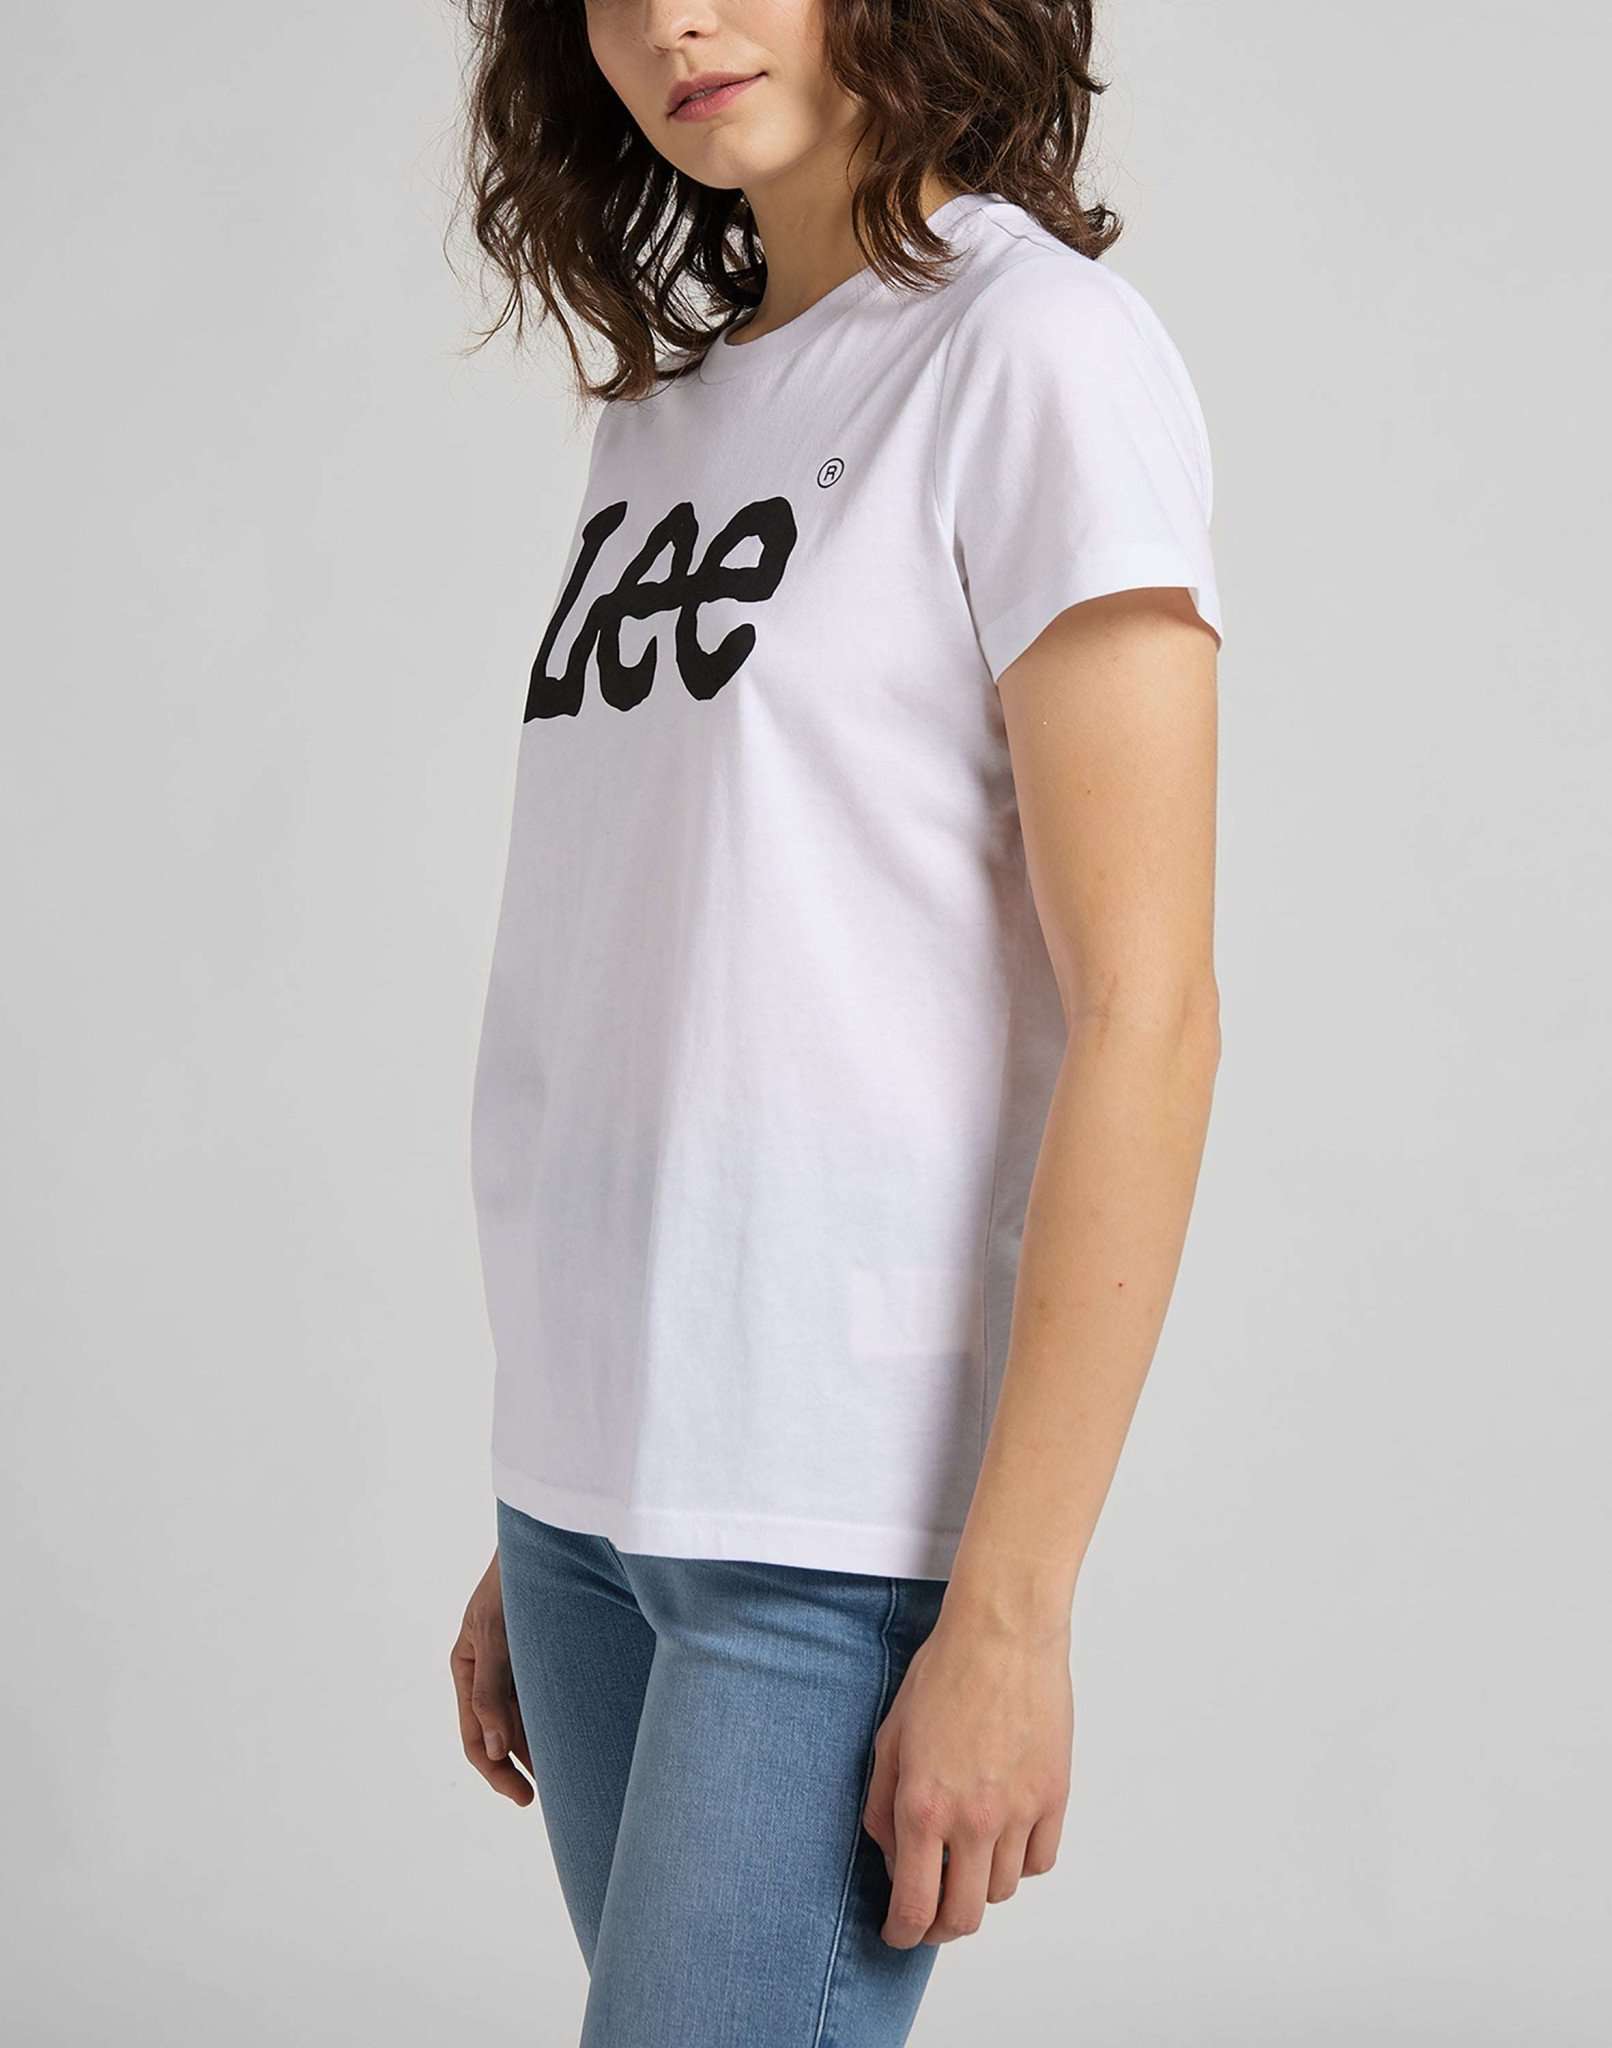 Logo Tee in White T-Shirts Lee   